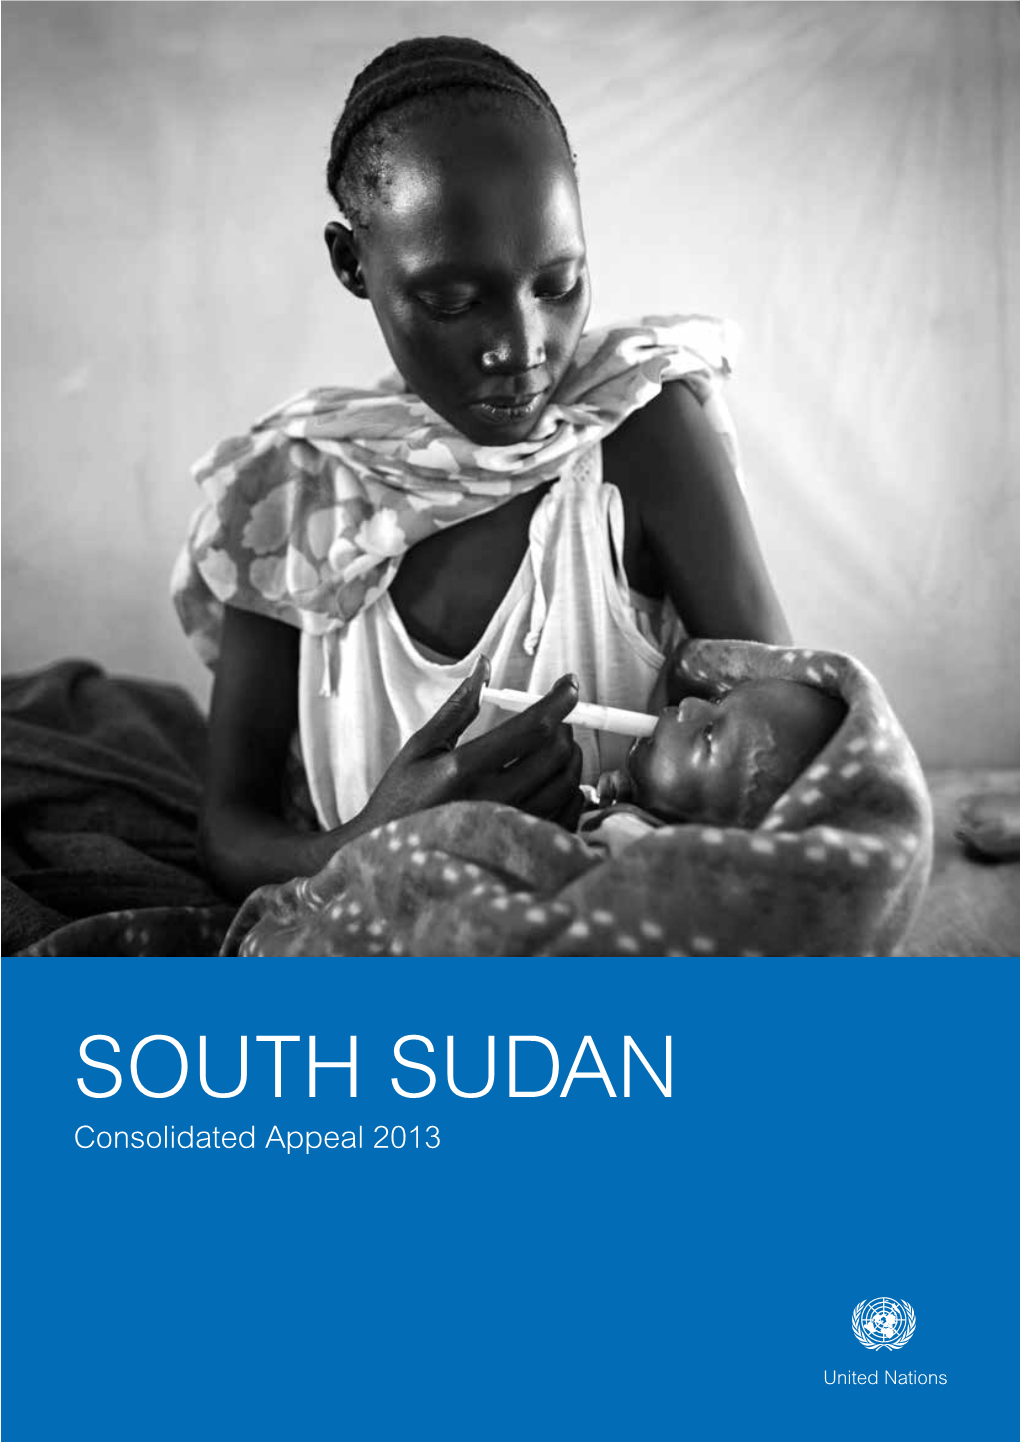 SOUTH SUDAN Consolidated Appeal 2013